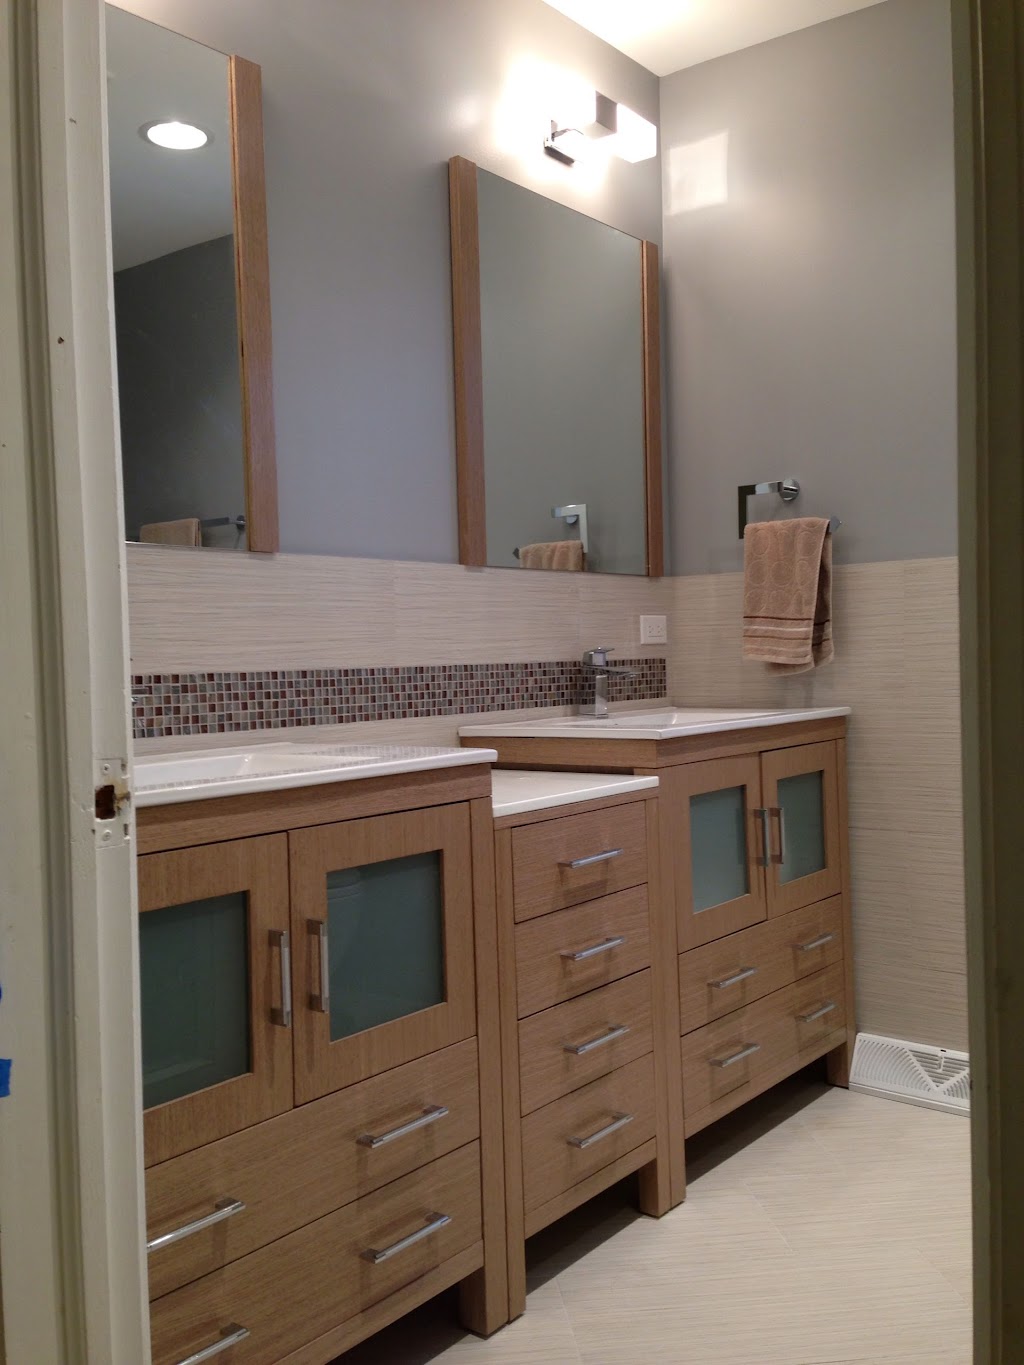 First Choice Remodeling & Development Group, Inc | 1108 S Waukegan Rd, Northbrook, IL 60062 | Phone: (847) 564-9300